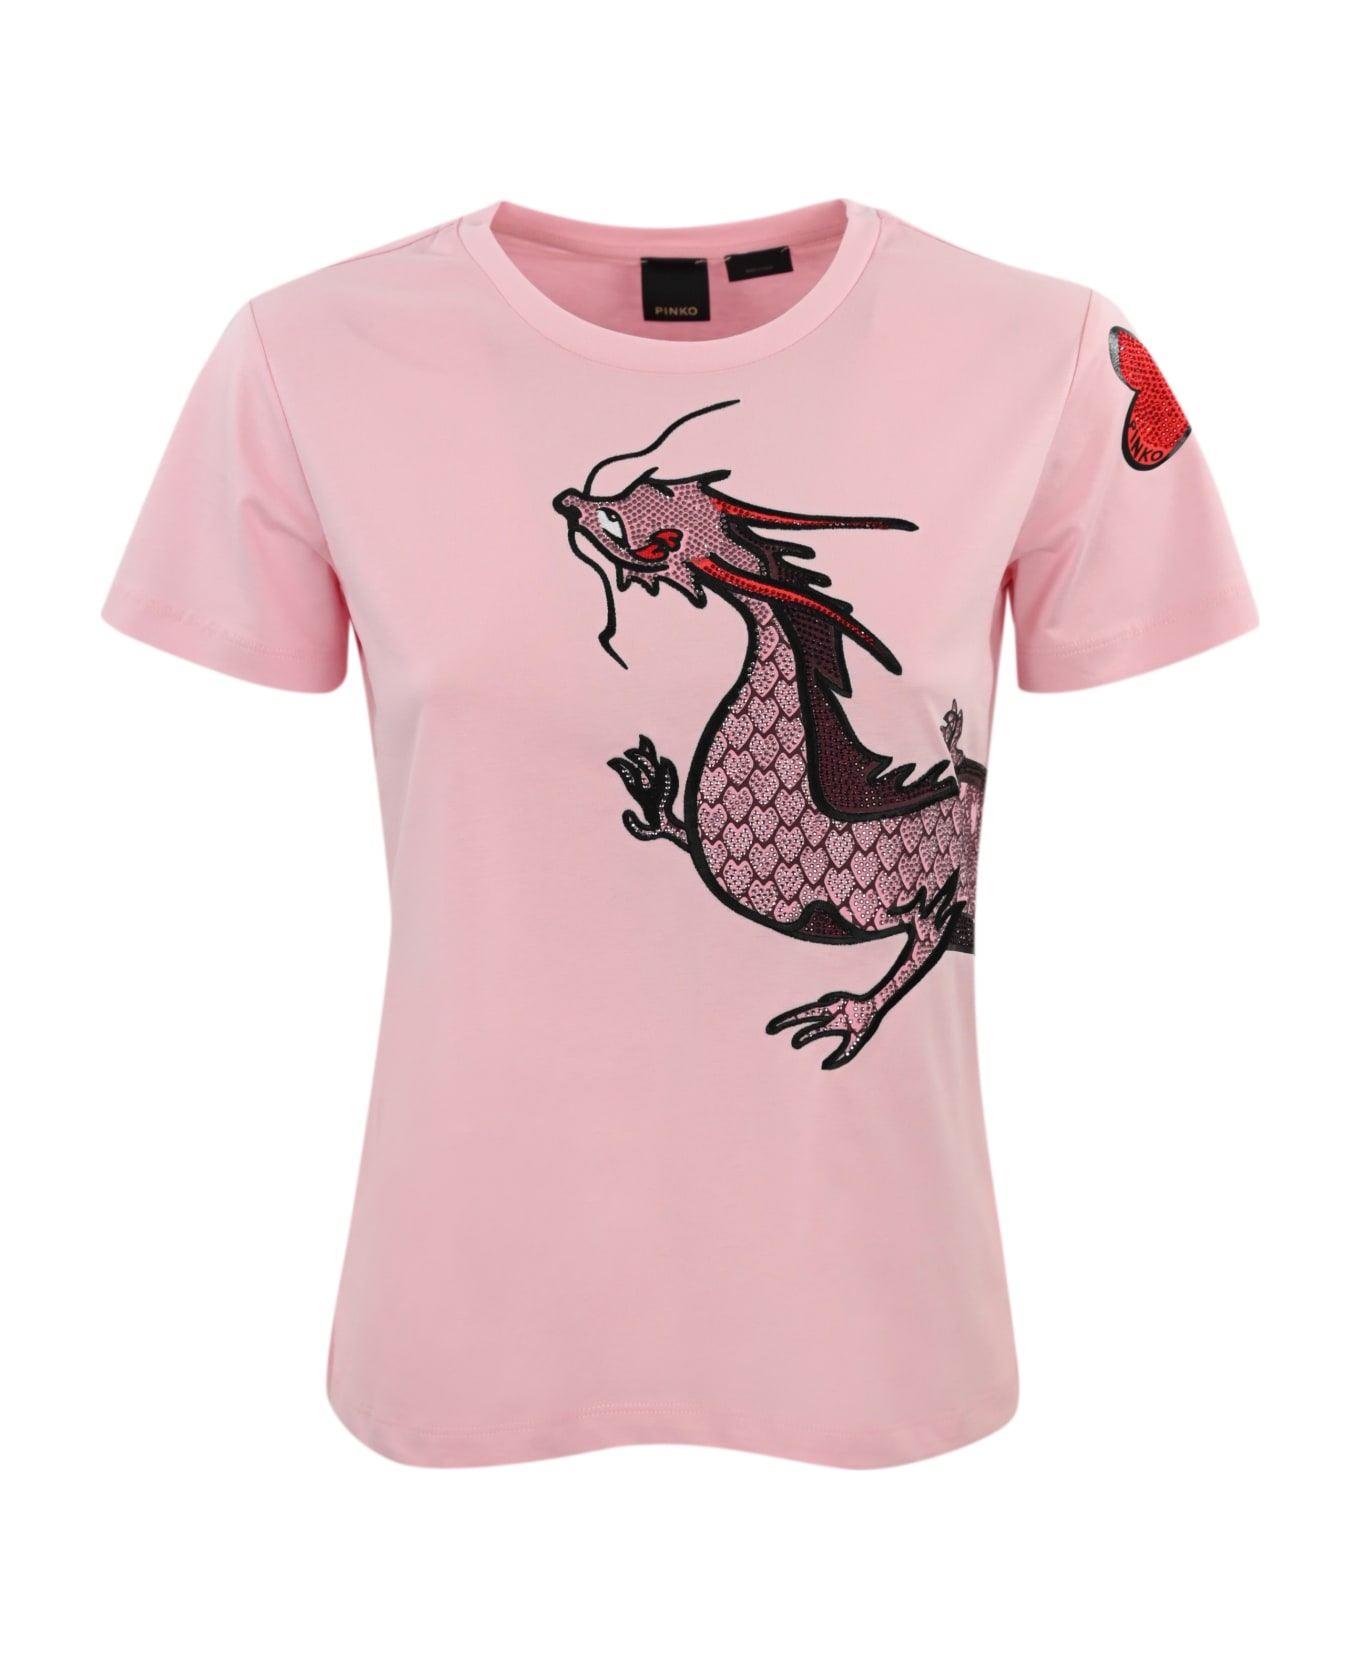 Pinko Quentin T-shirt With Glitter Design - Pink